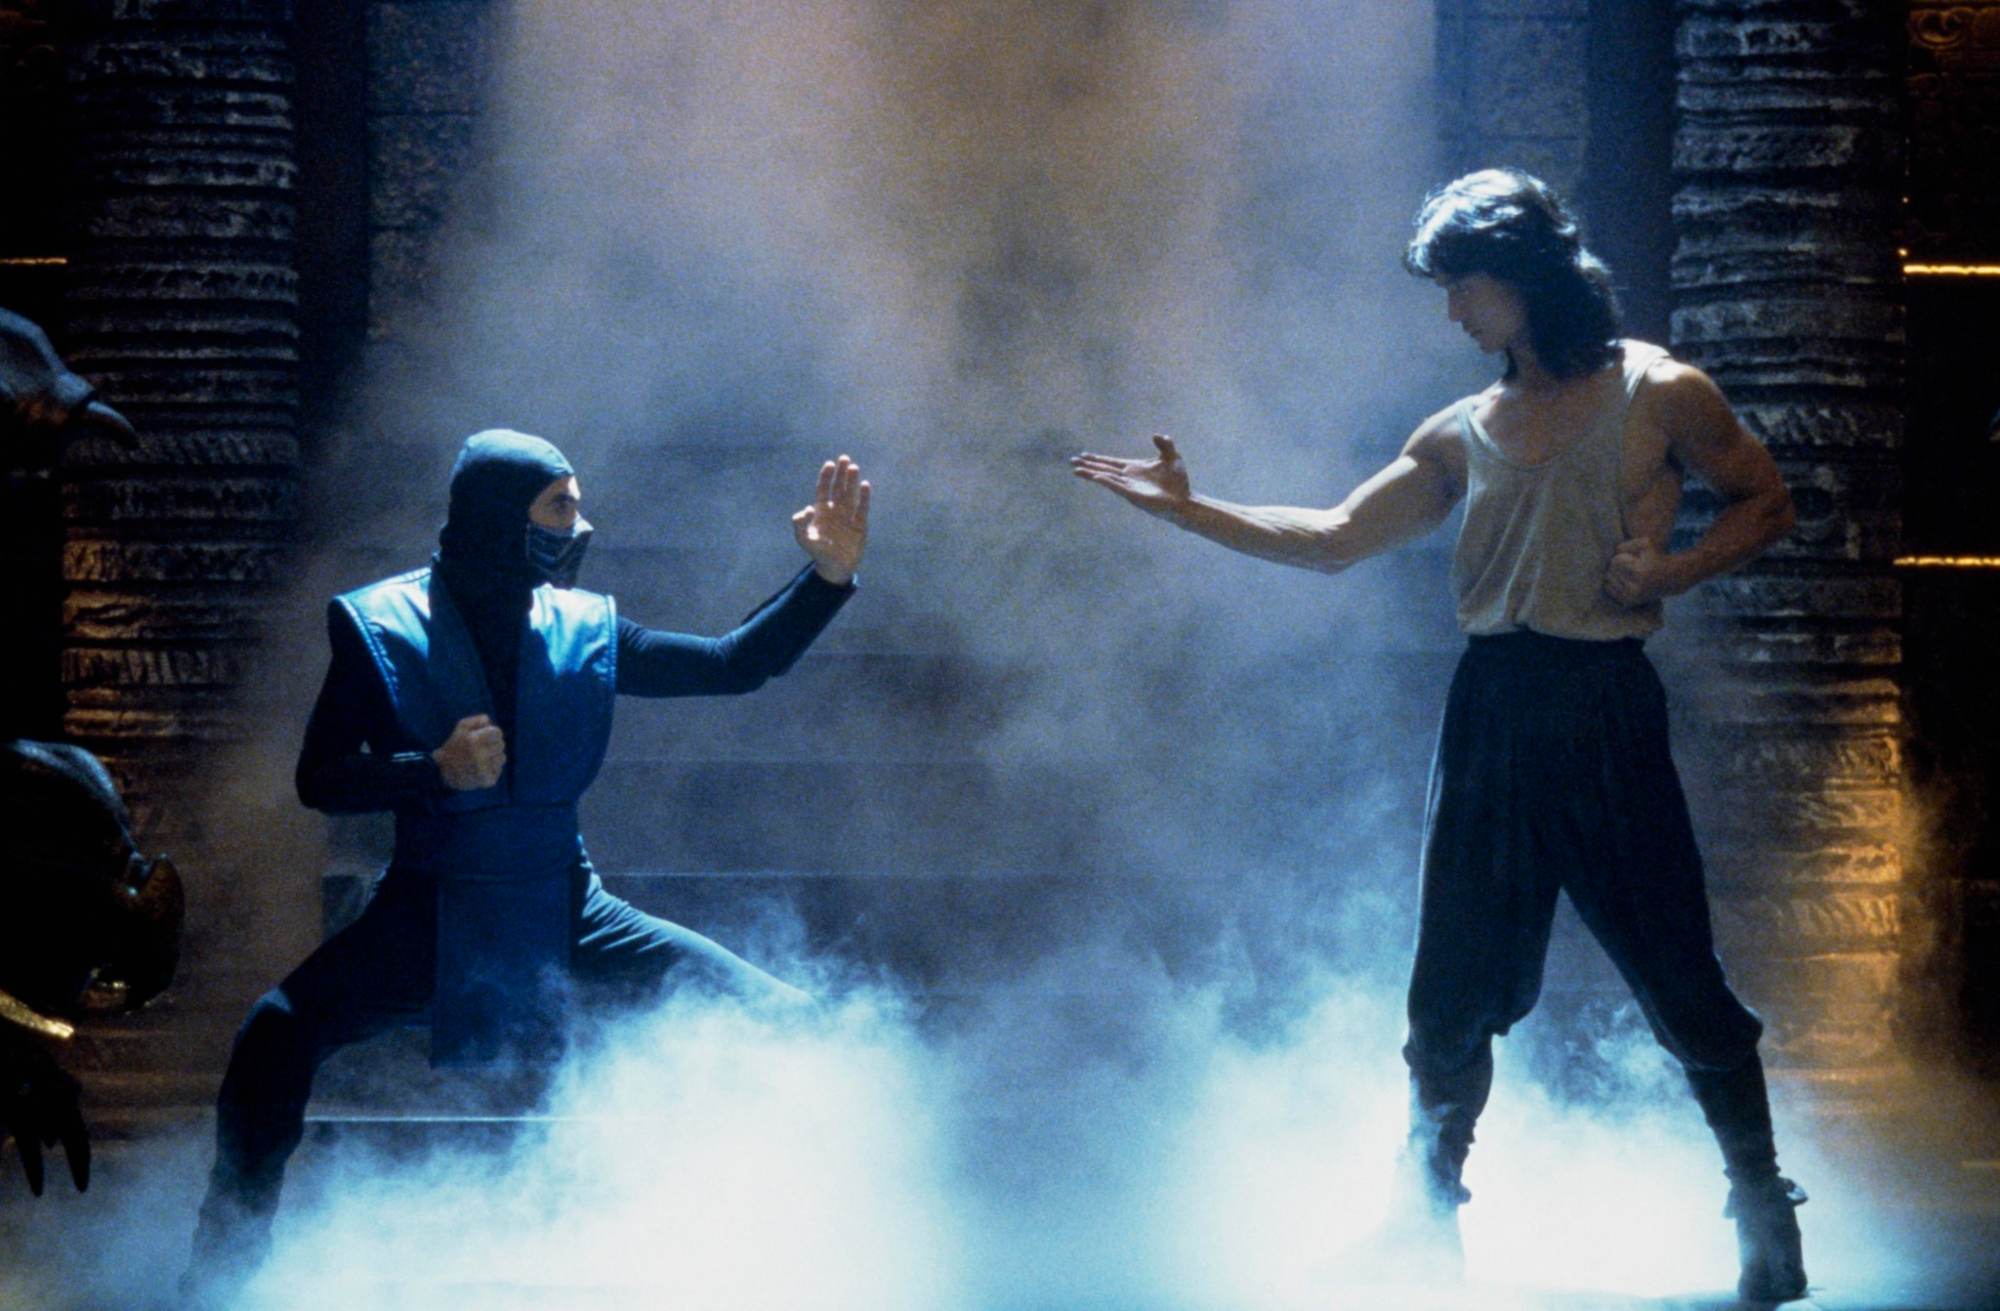 Video game movies 'Mortal Kombat' François Petit as Sub-Zero and Robin Shou as Liu Kang in a fighting pose standing in mist.